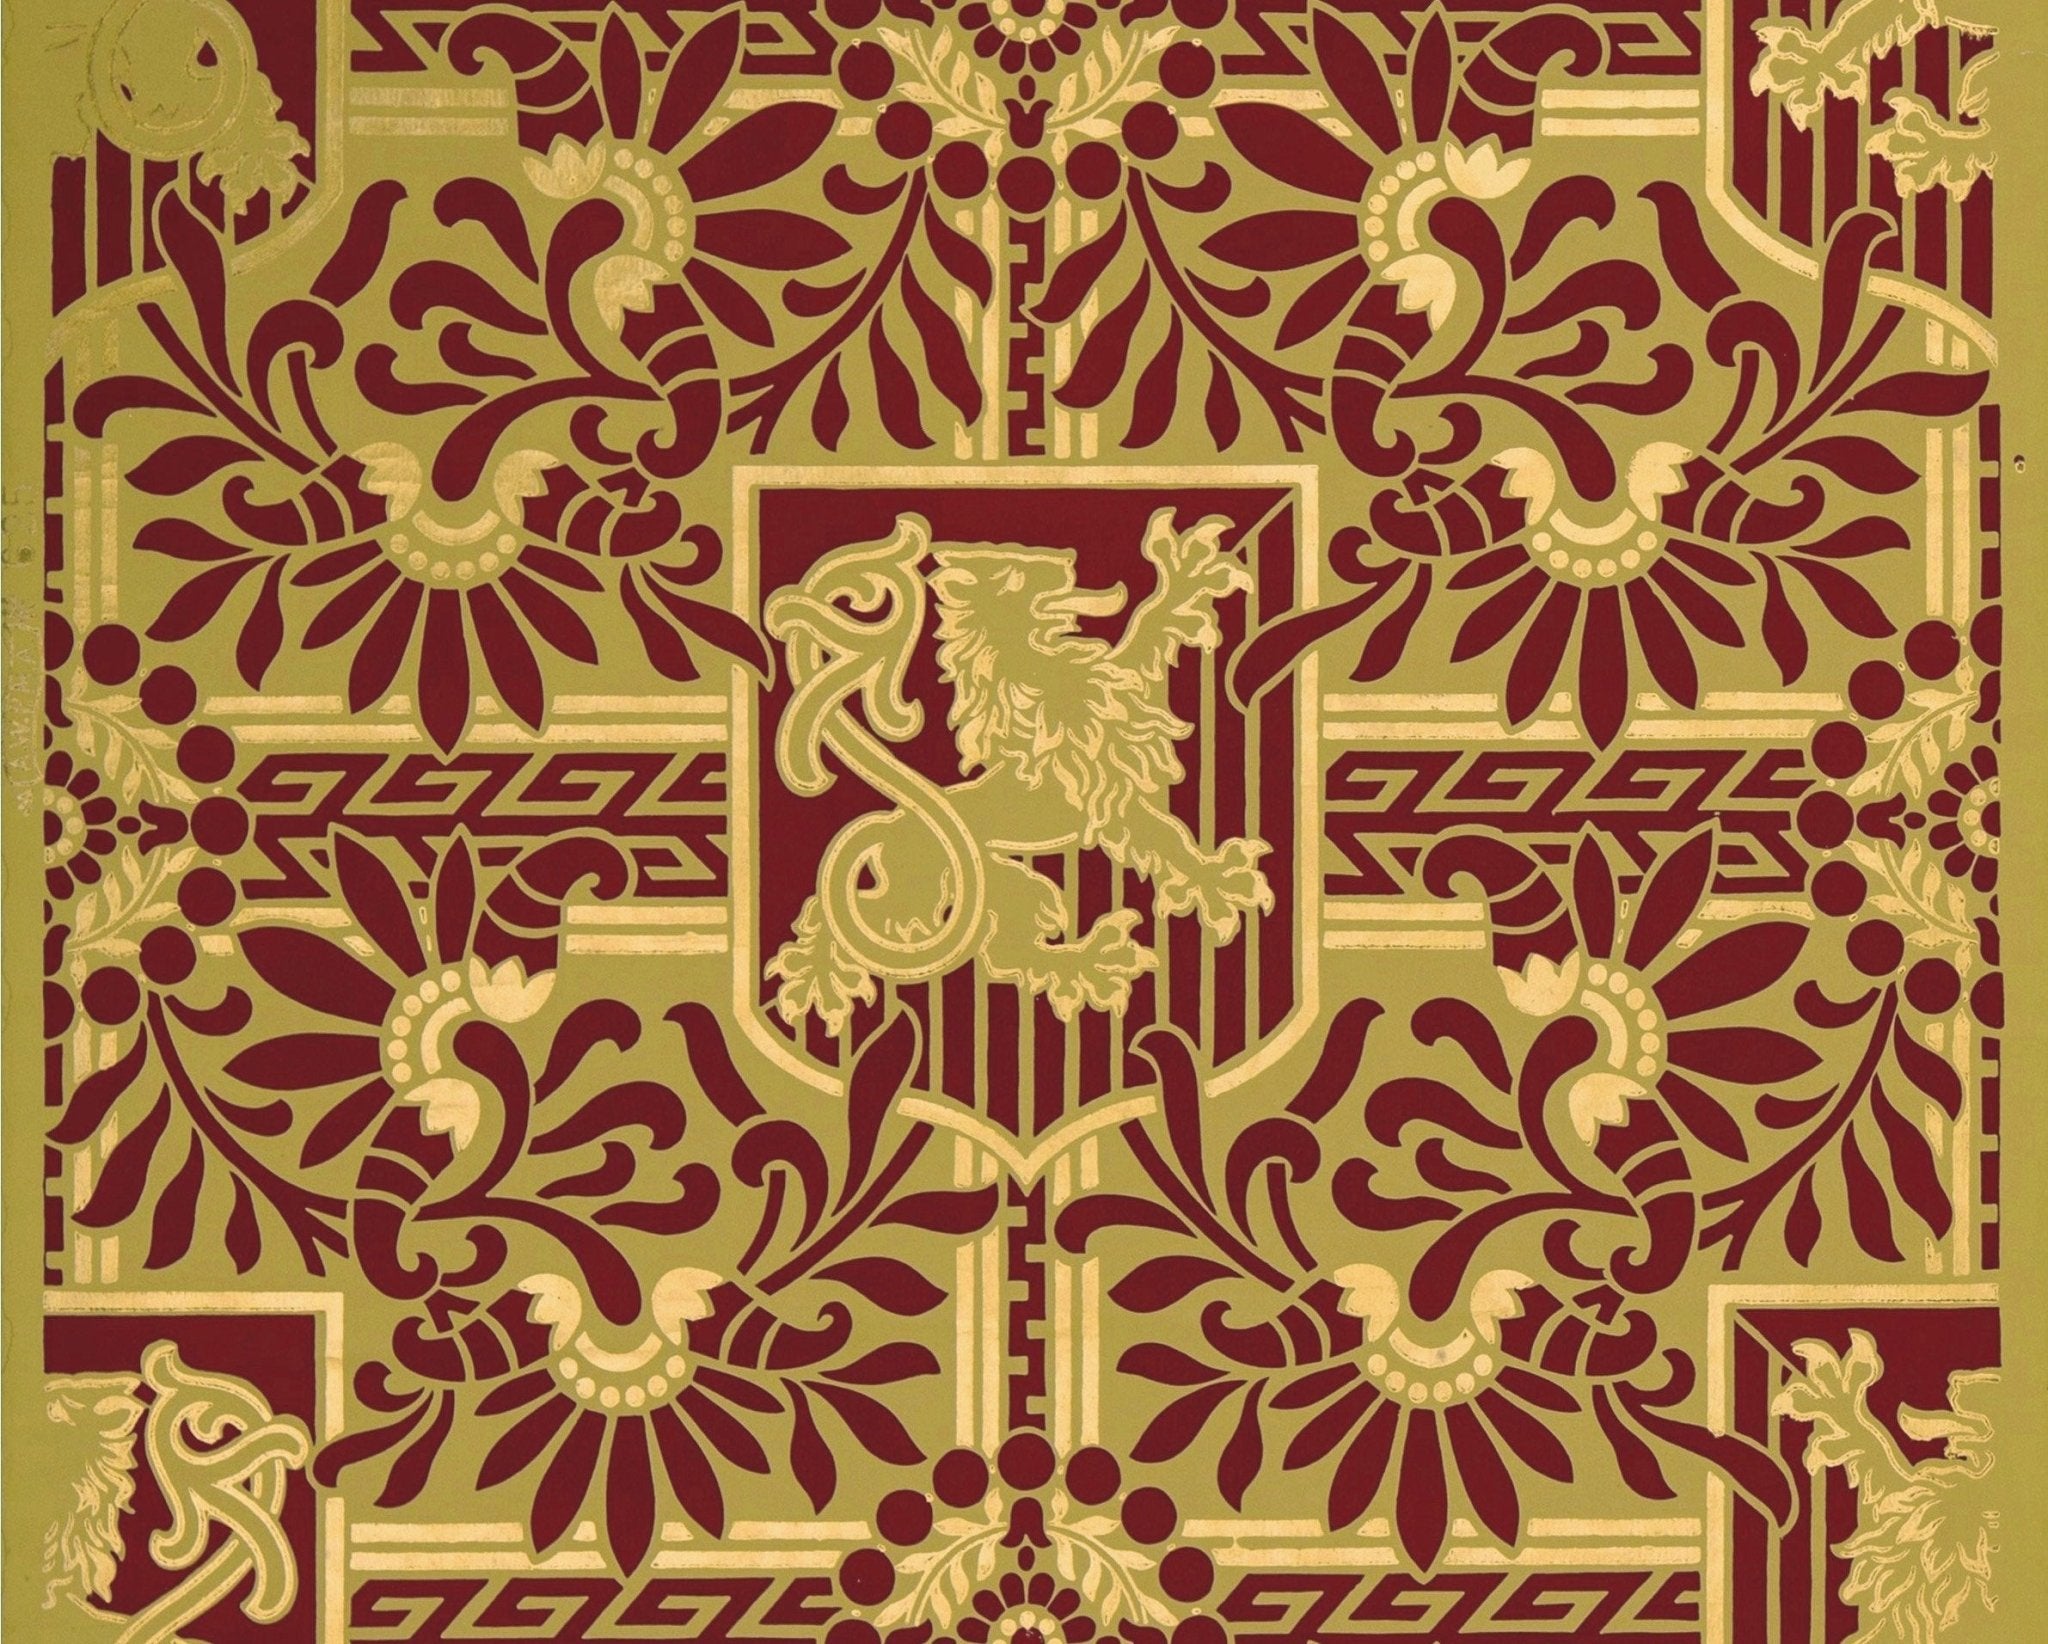 The source image for this fabulous floorcloth pattern. Based on wallpaper produced by the A.W.P.M.A., c. 1886.